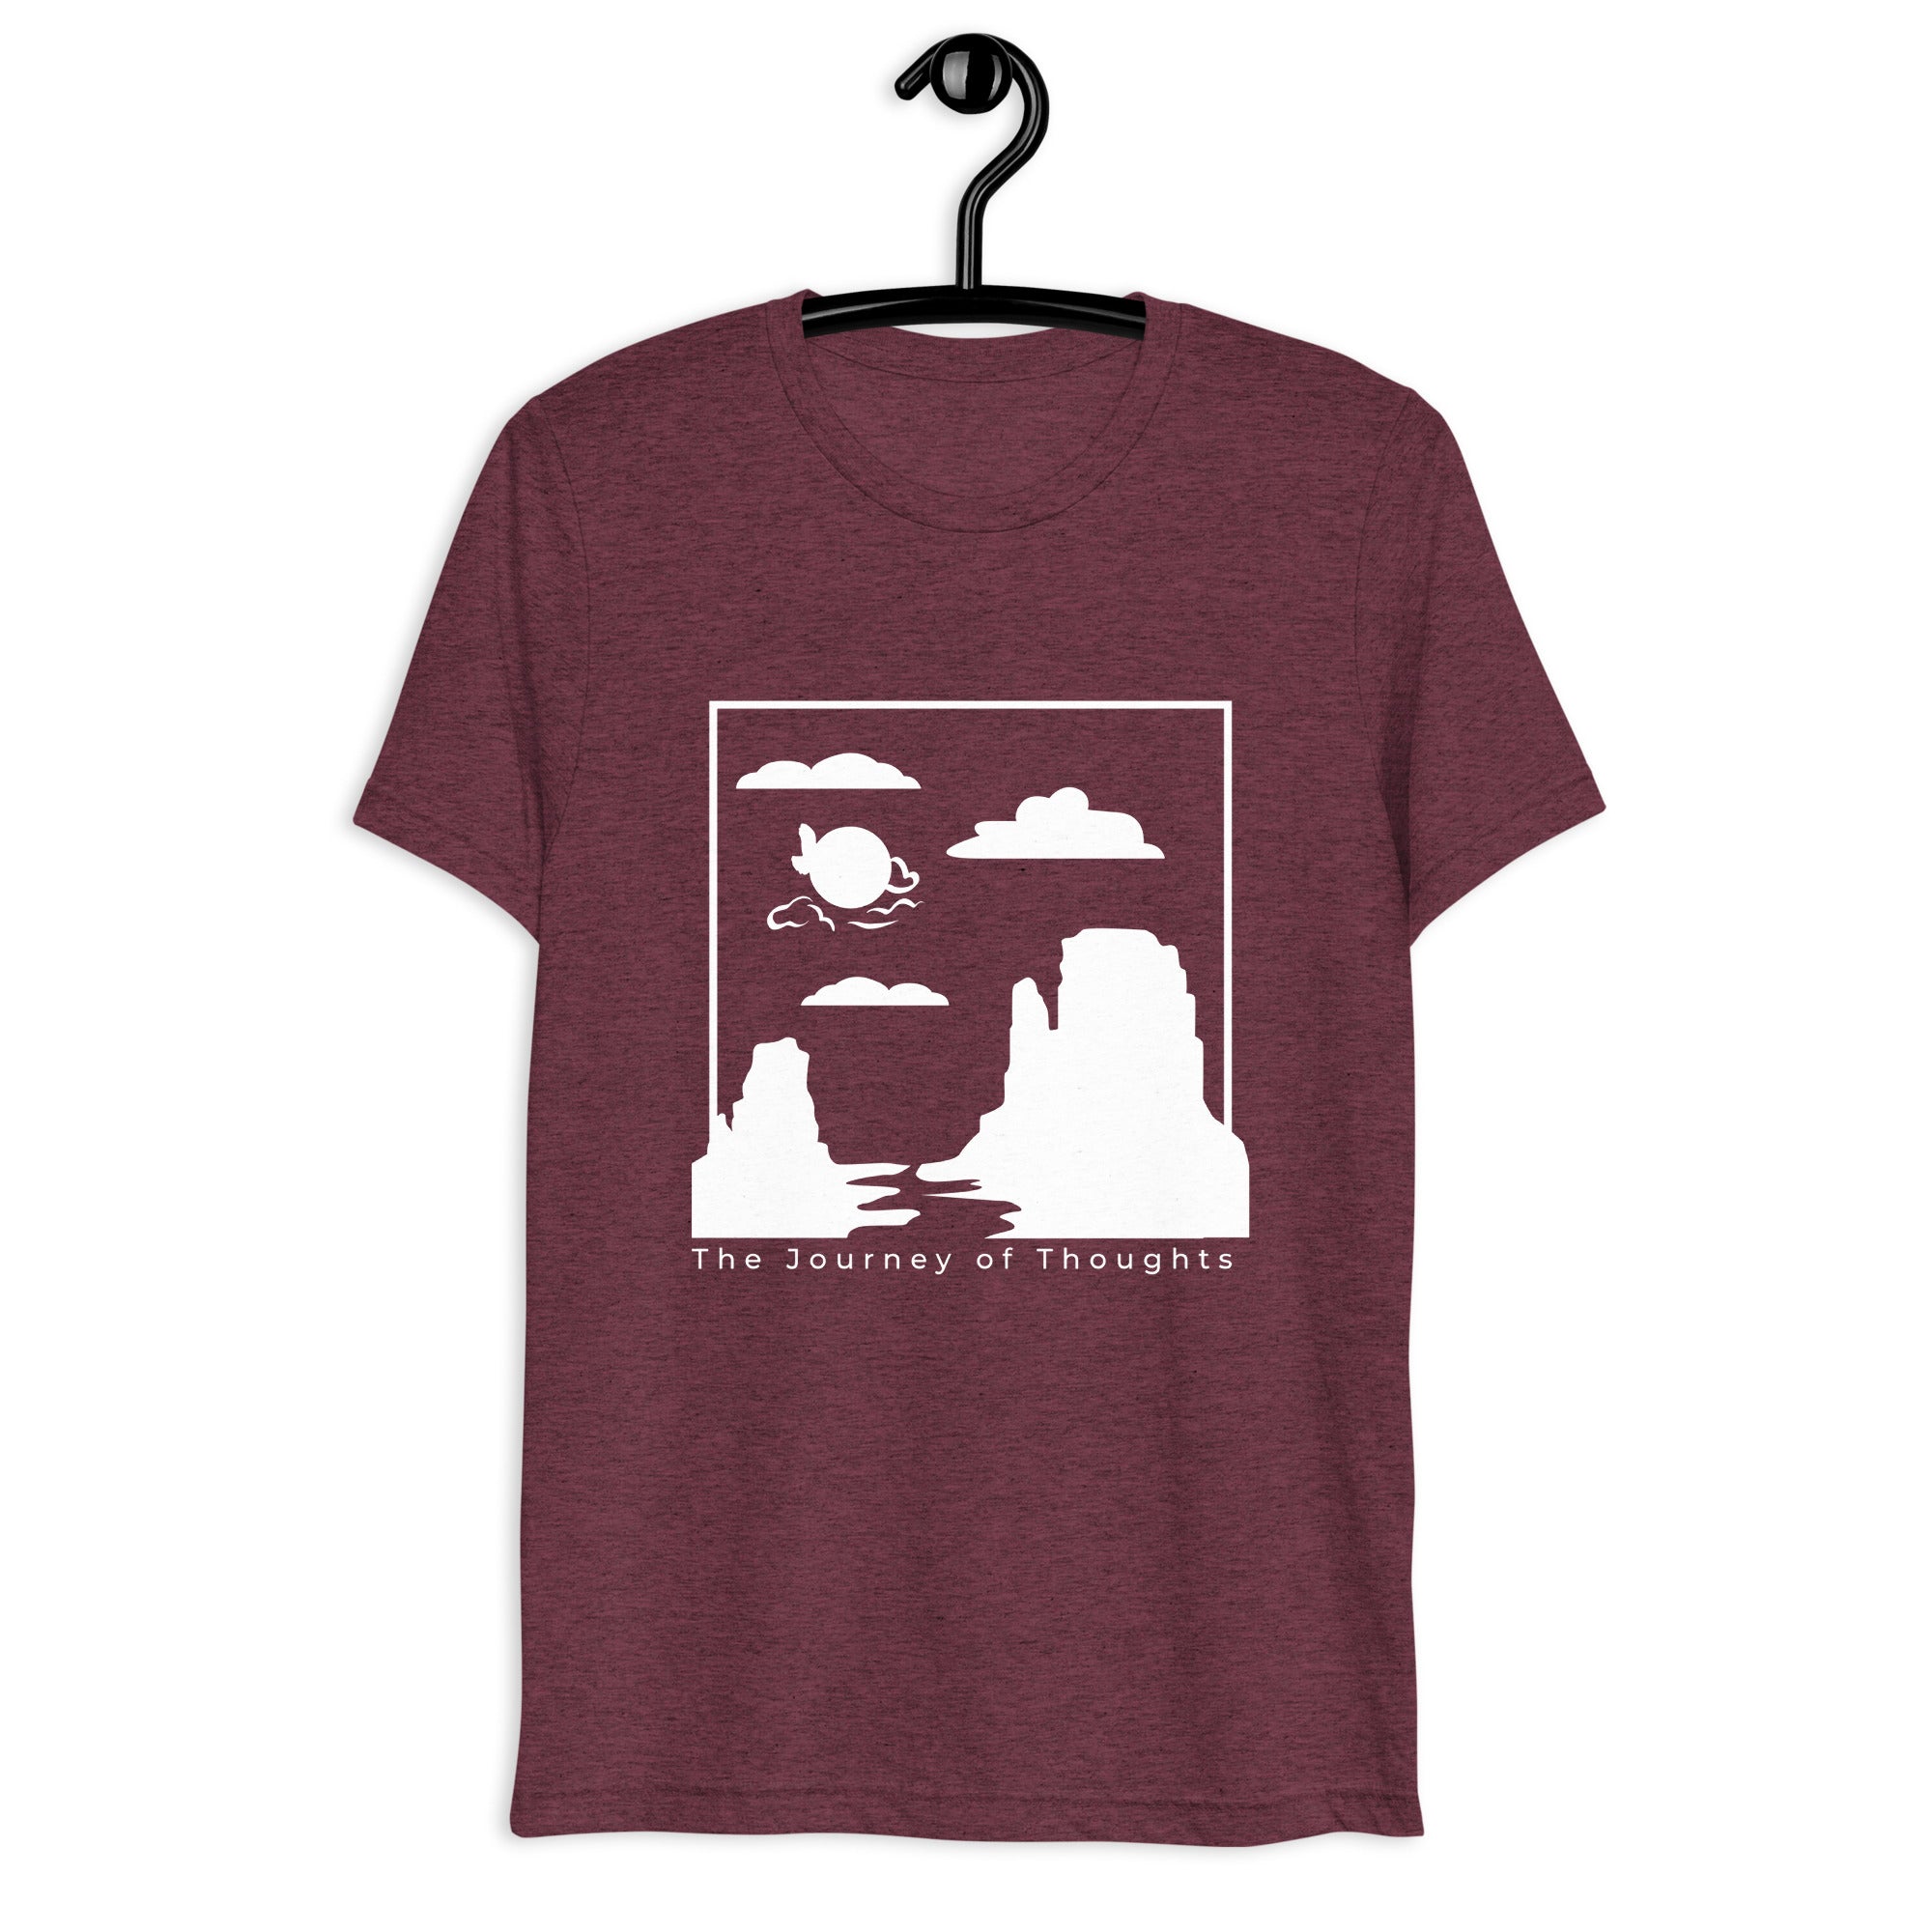 The journey of thoughts- a tale to ta tell collection short sleeve t-shirt